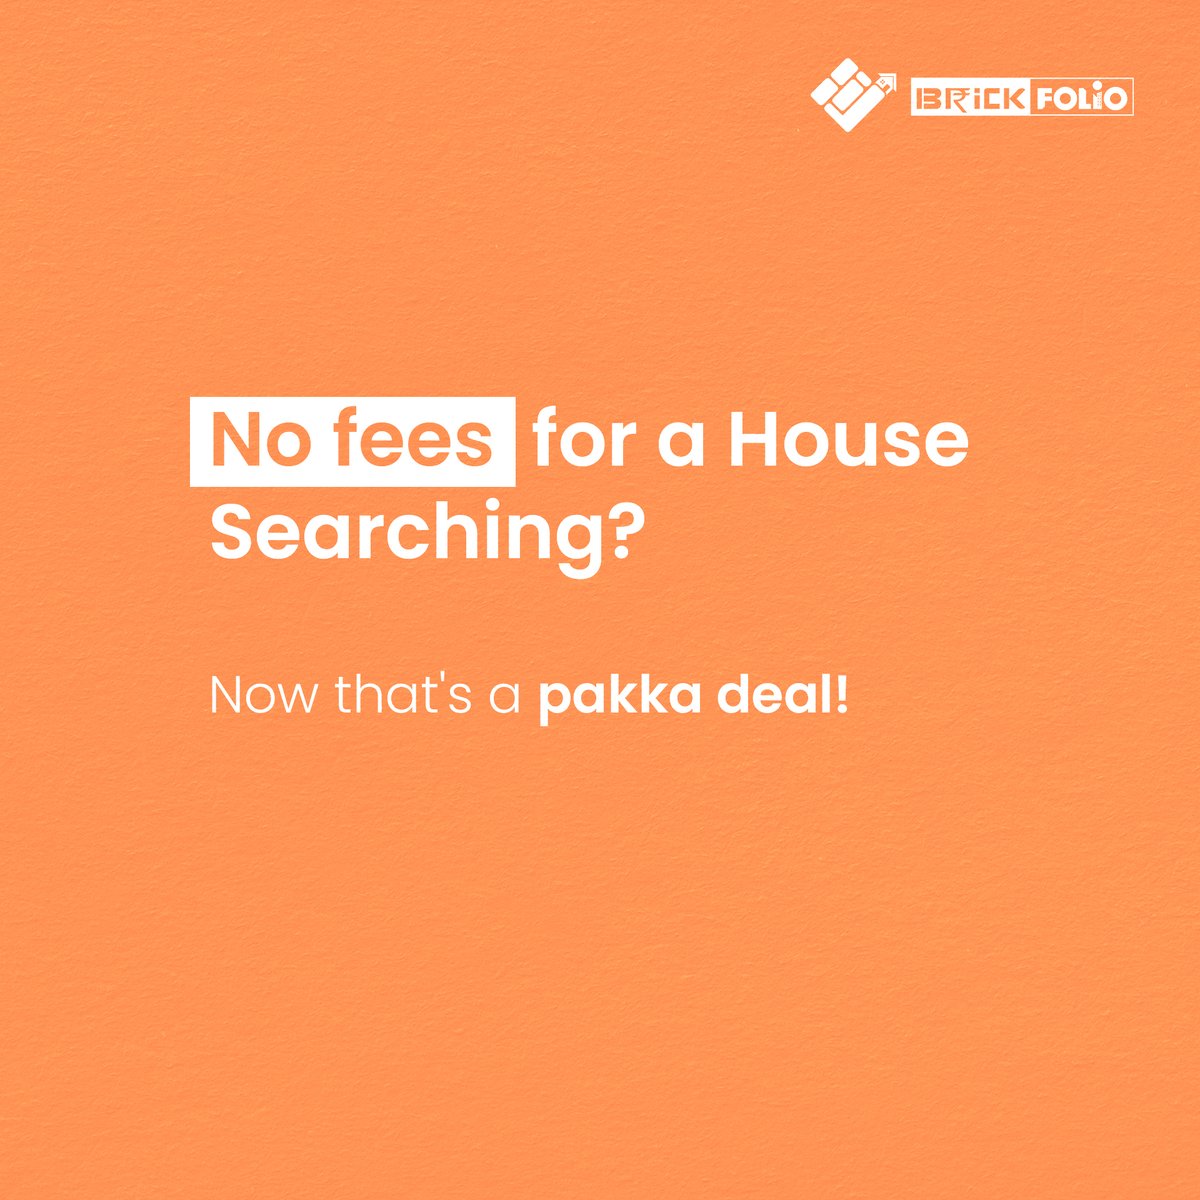 Say goodbye to fees and hello to savings! Explore homes without any fees attached - it's the perfect opportunity to find your ideal space. 🏡💰 

#brickfolio #properties #realestate #homes #NoFees #HouseHunting #SavingsOpportunity